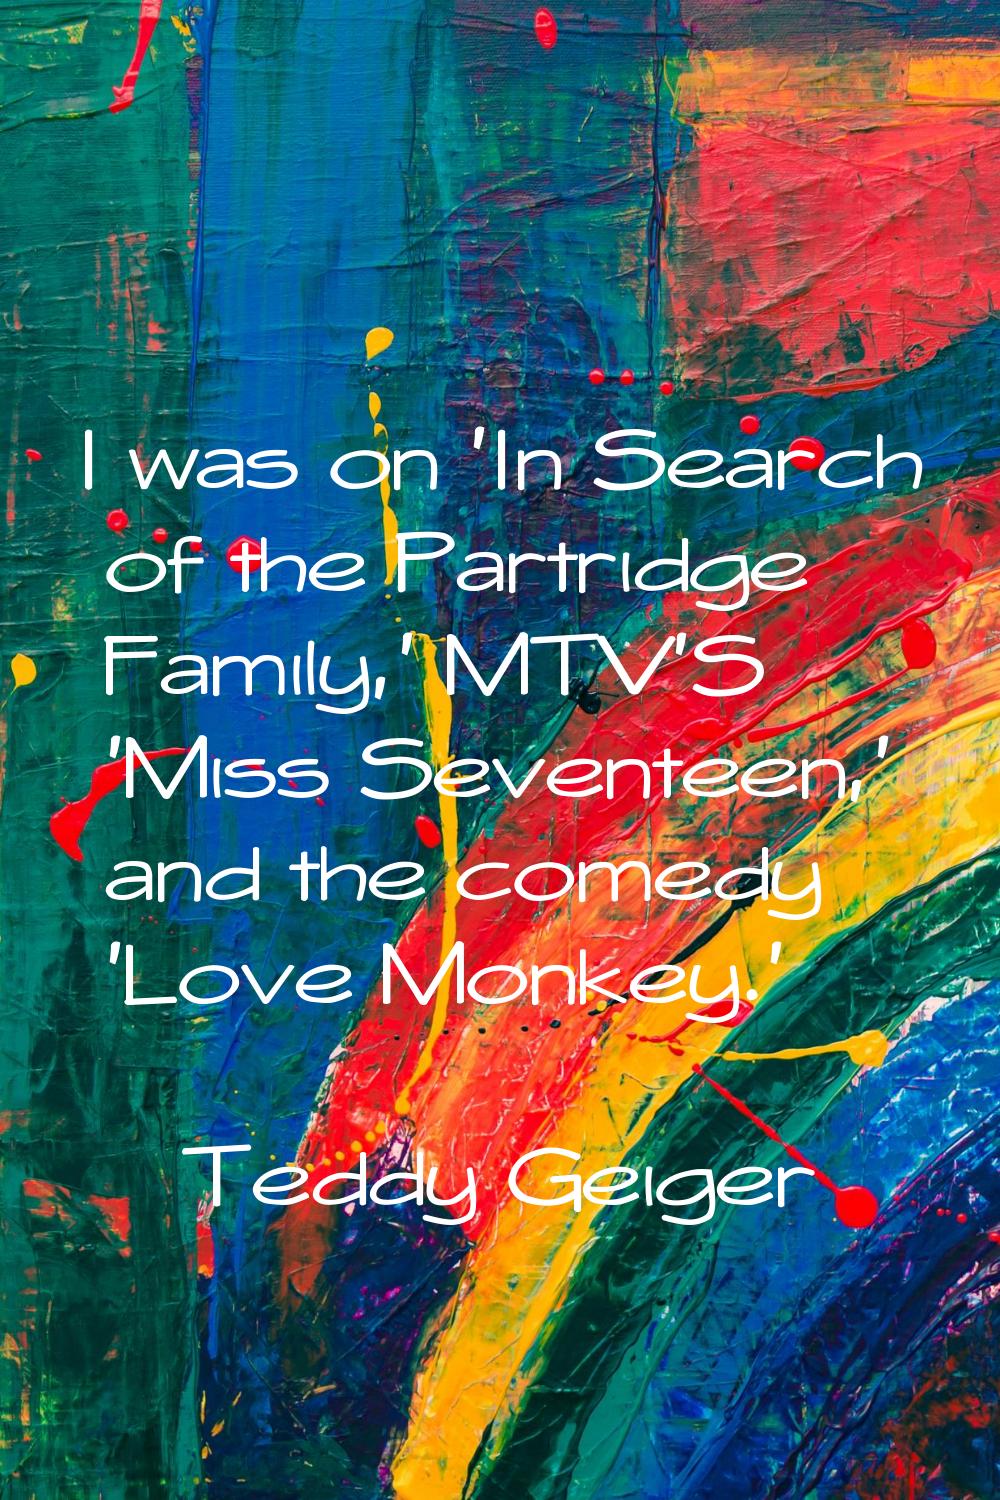 I was on 'In Search of the Partridge Family,' MTV'S 'Miss Seventeen,' and the comedy 'Love Monkey.'